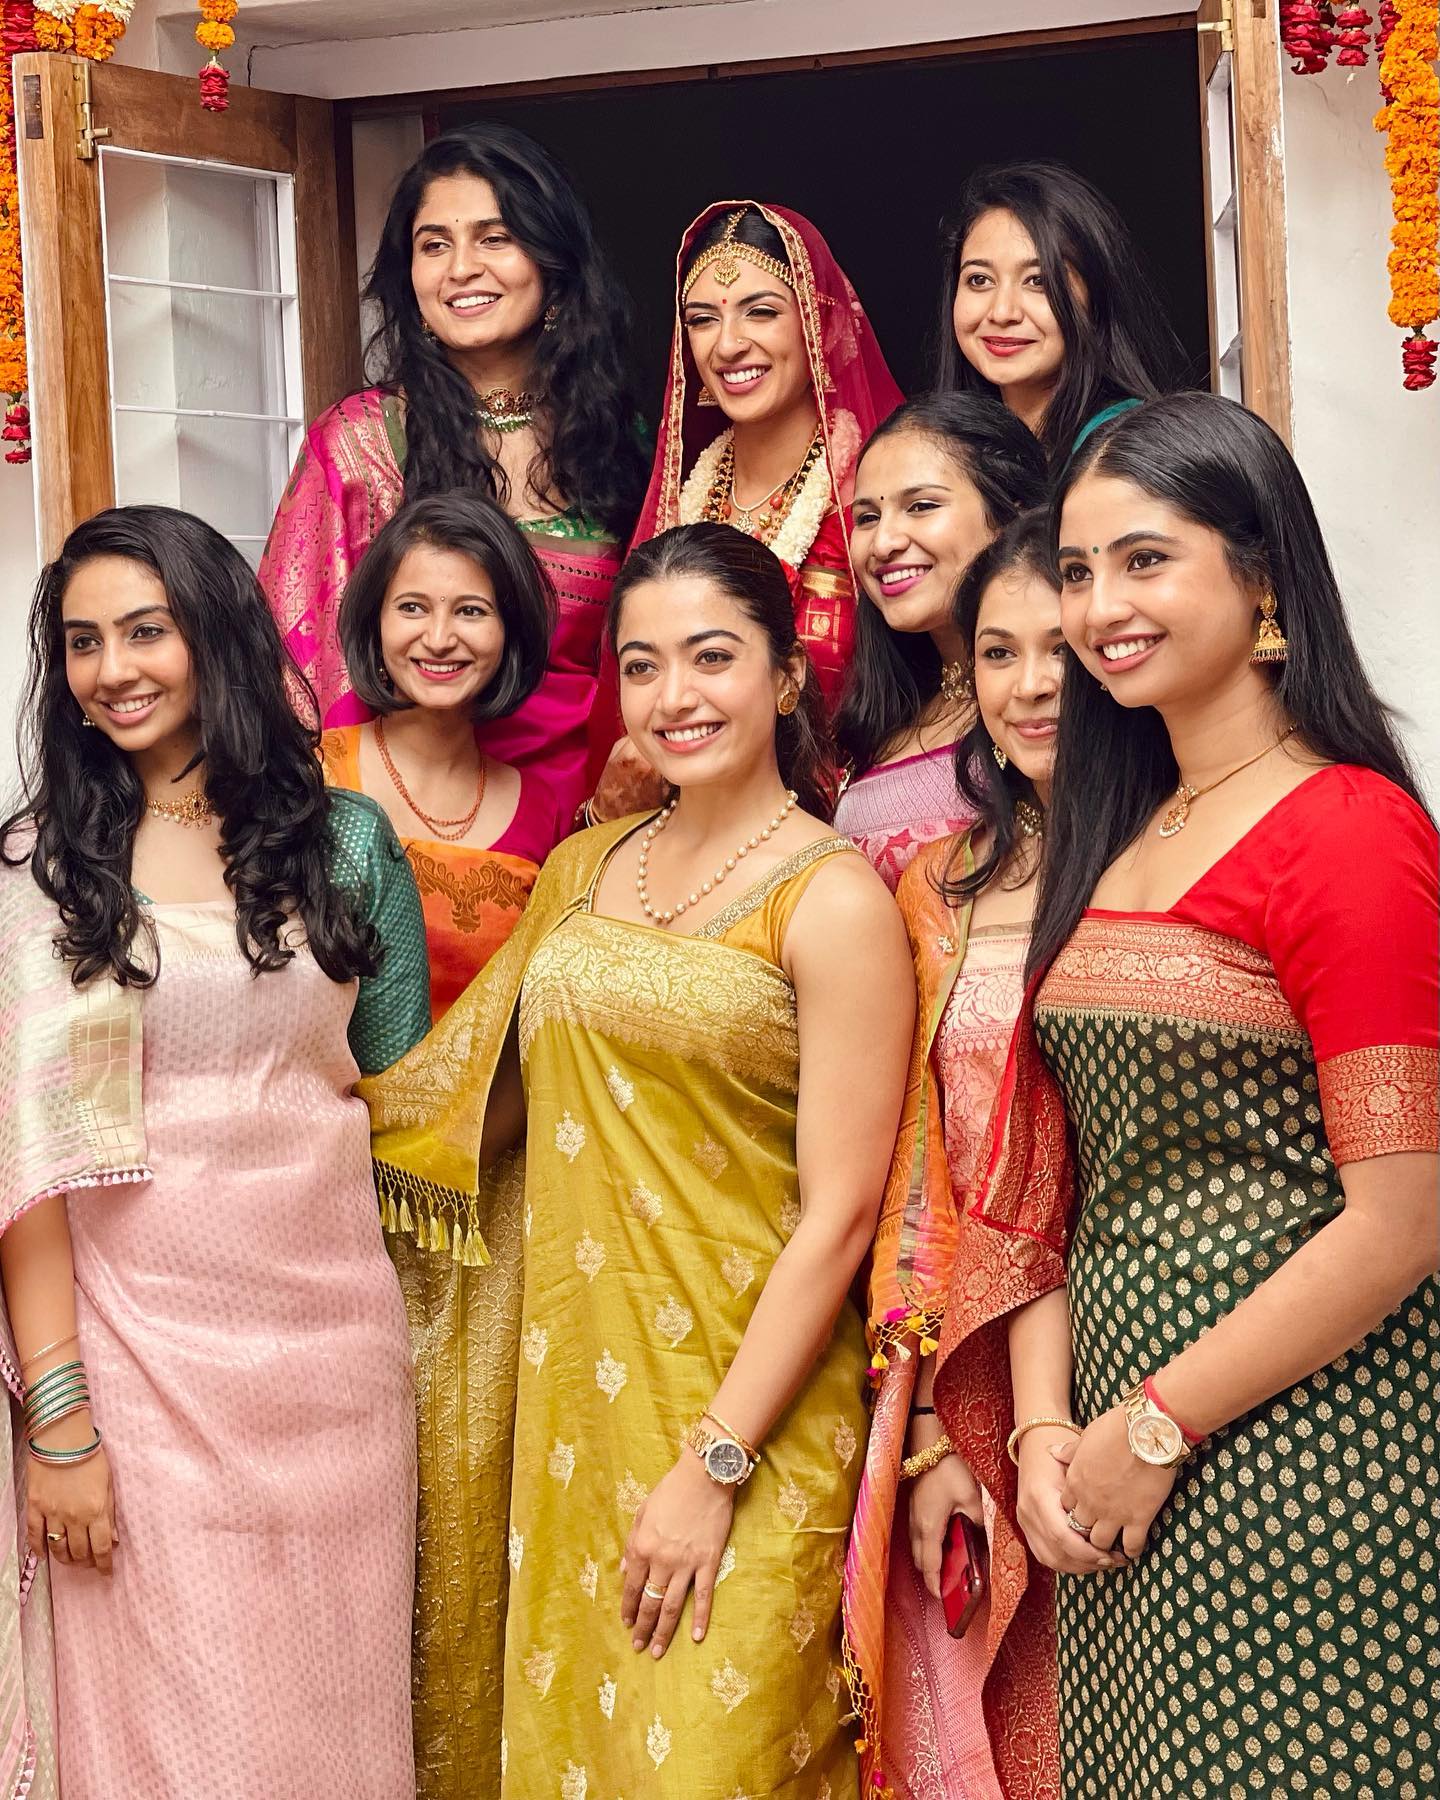 281359954 582336226341764 6557755054205721756 n Rashmika Mandanna attended her best friend's wedding as a bridesmaid, 'National crush' robbed the gathering in Kodava sari